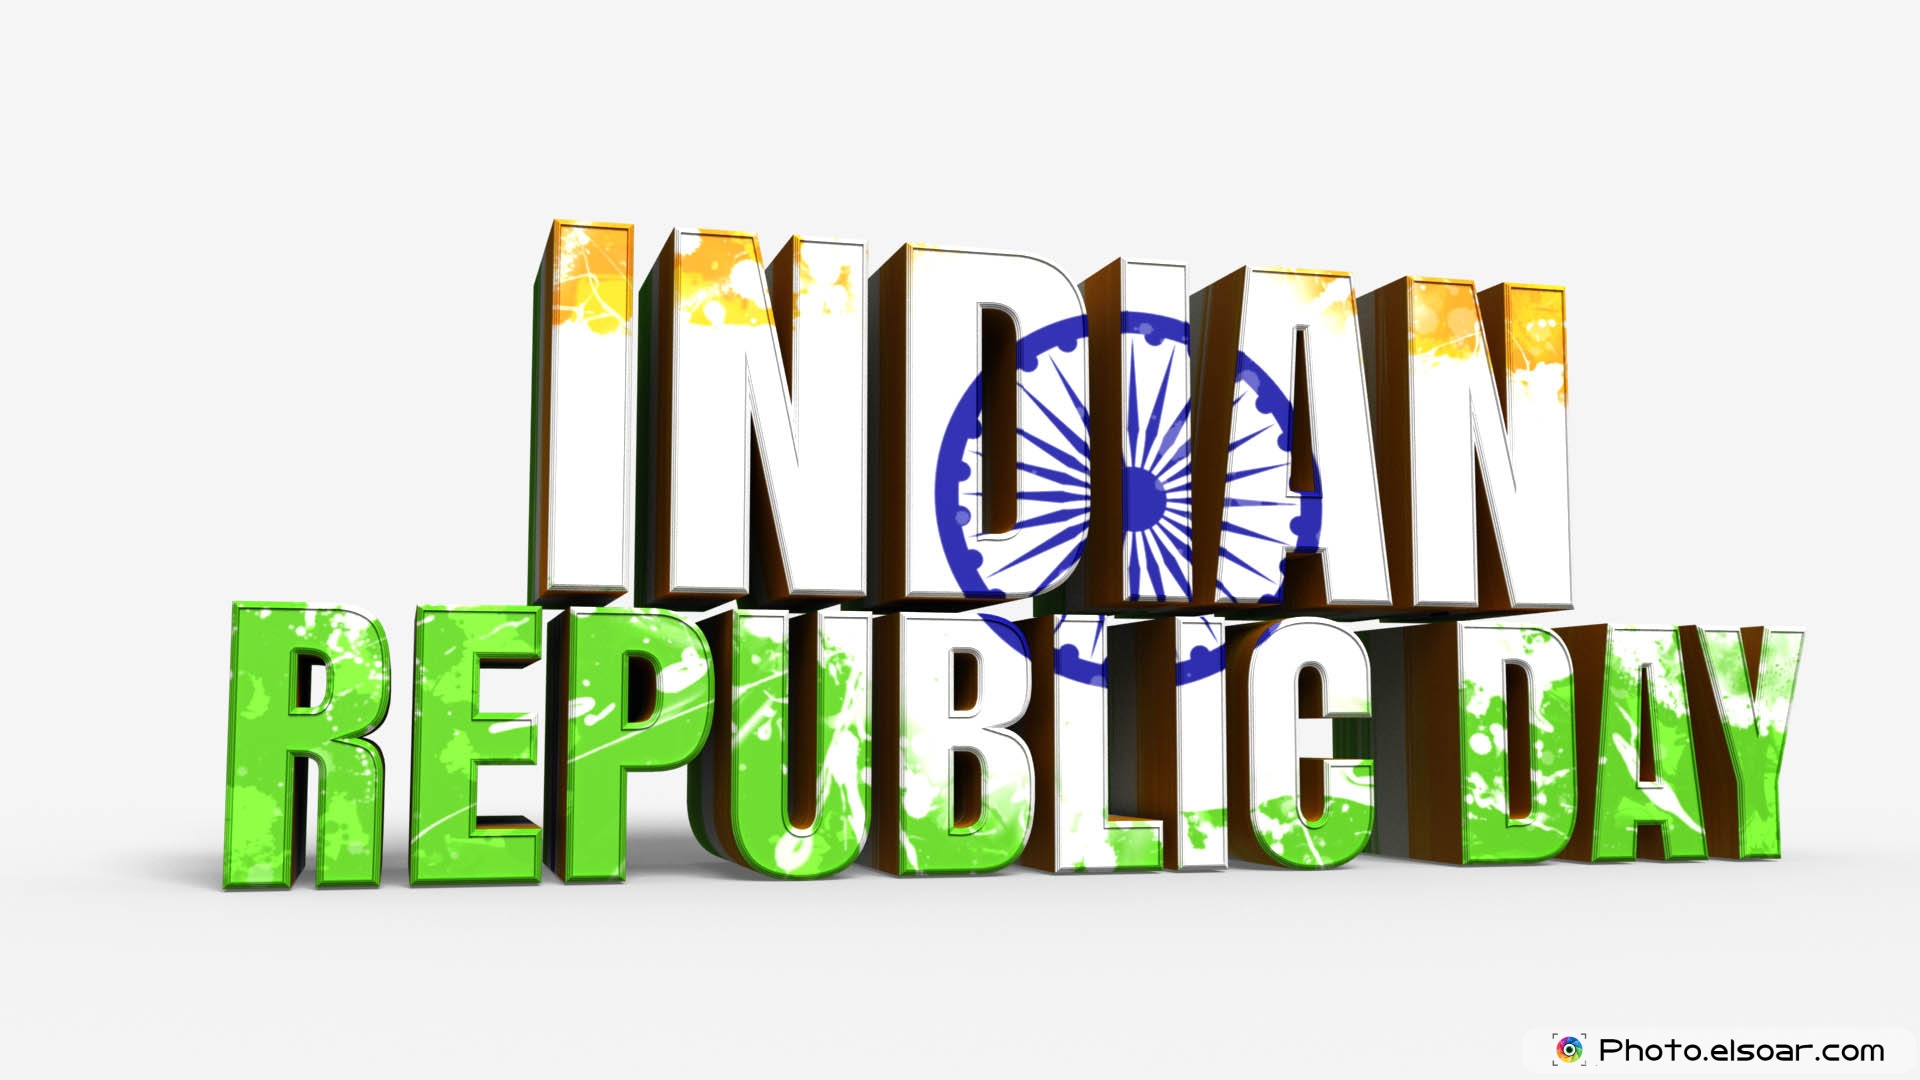 Happy 2016 Republic Day India 26 January Image With - Graphic Design - HD Wallpaper 